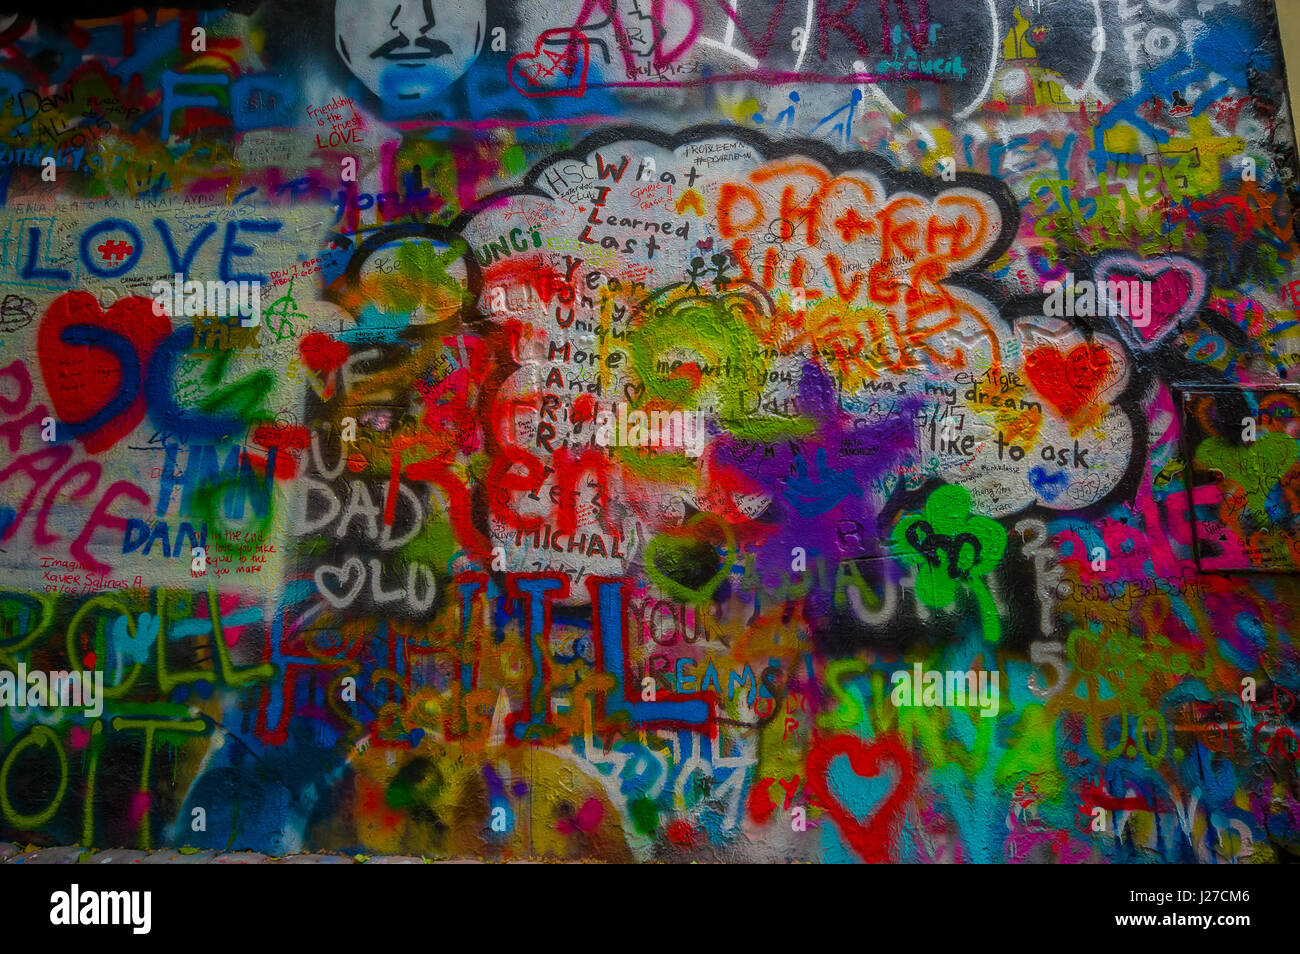 Prague, Czech Republic - 13 August, 2015: Famous John Lennon wall filled up with love inspired graffiti in city centre Stock Photo